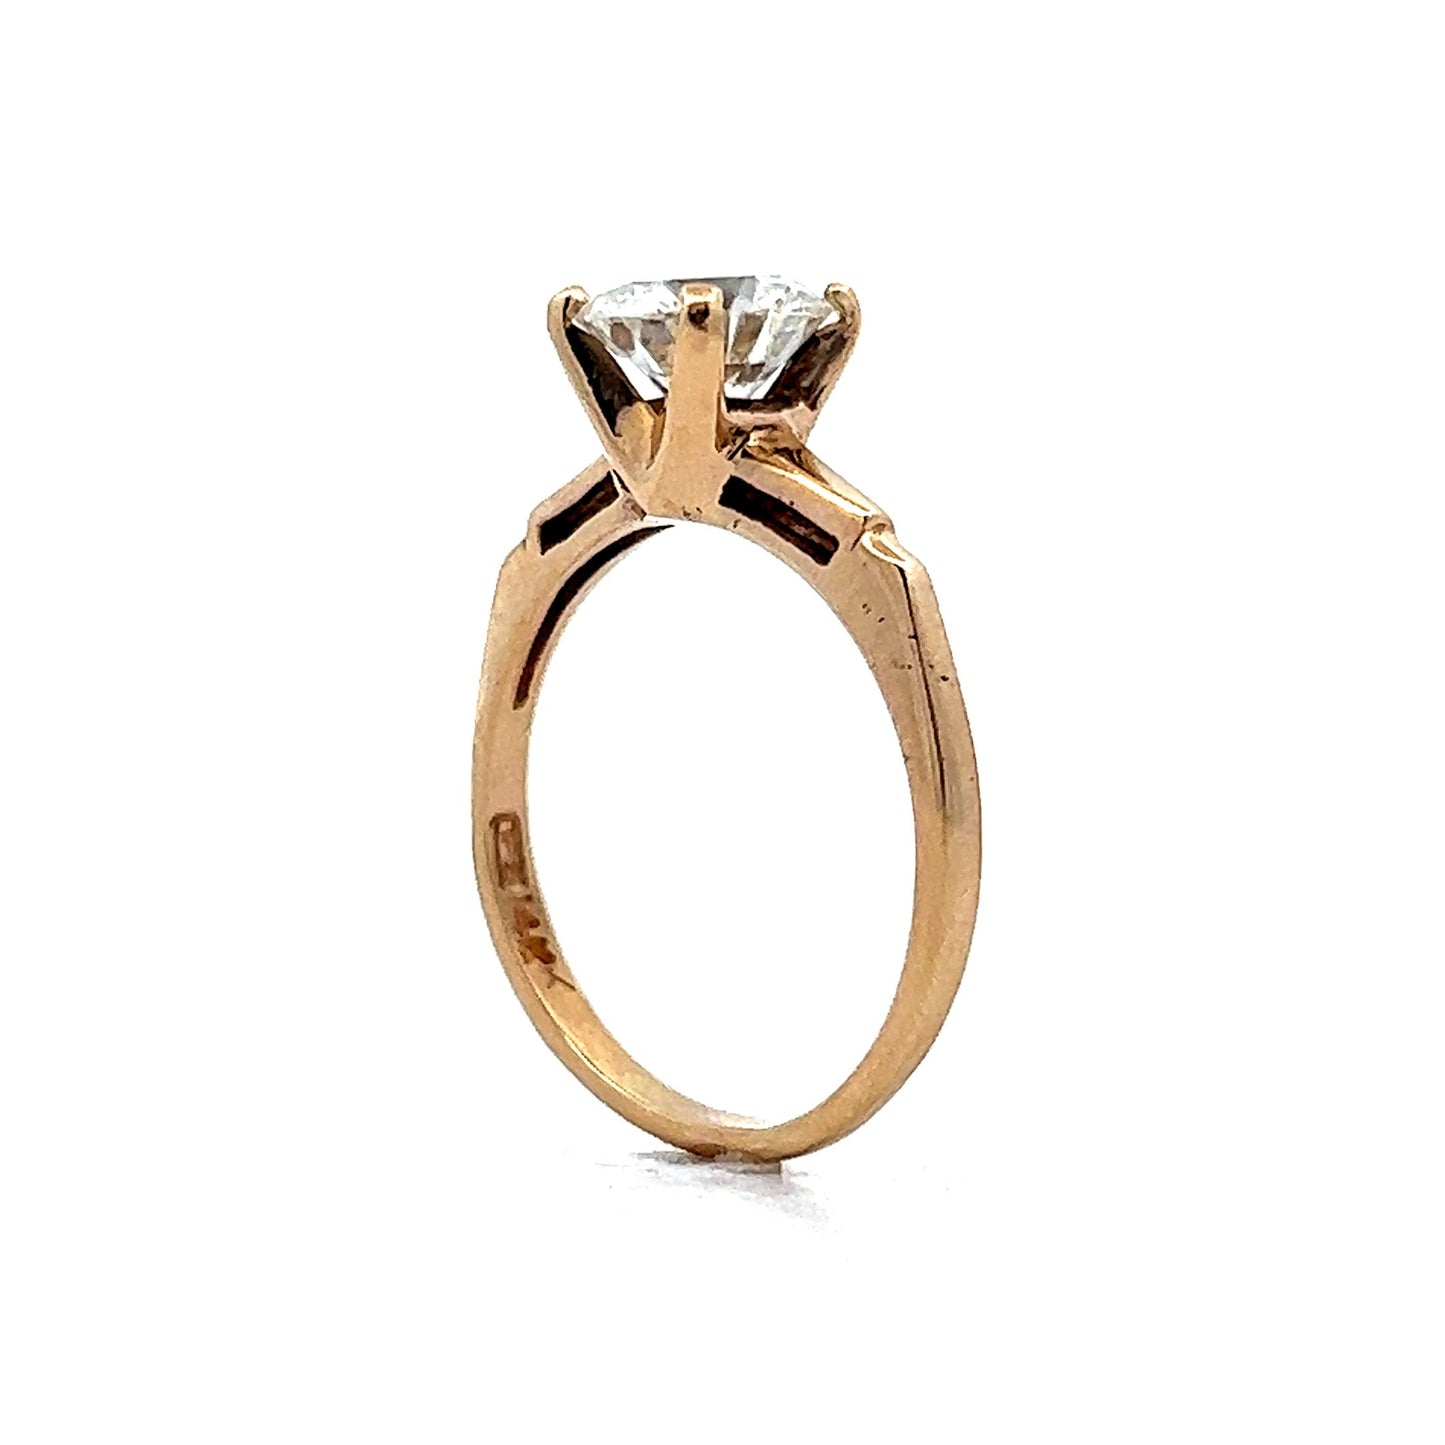 1.33 Round Solitaire Diamond Engagement Ring in 14k Yellow Gold